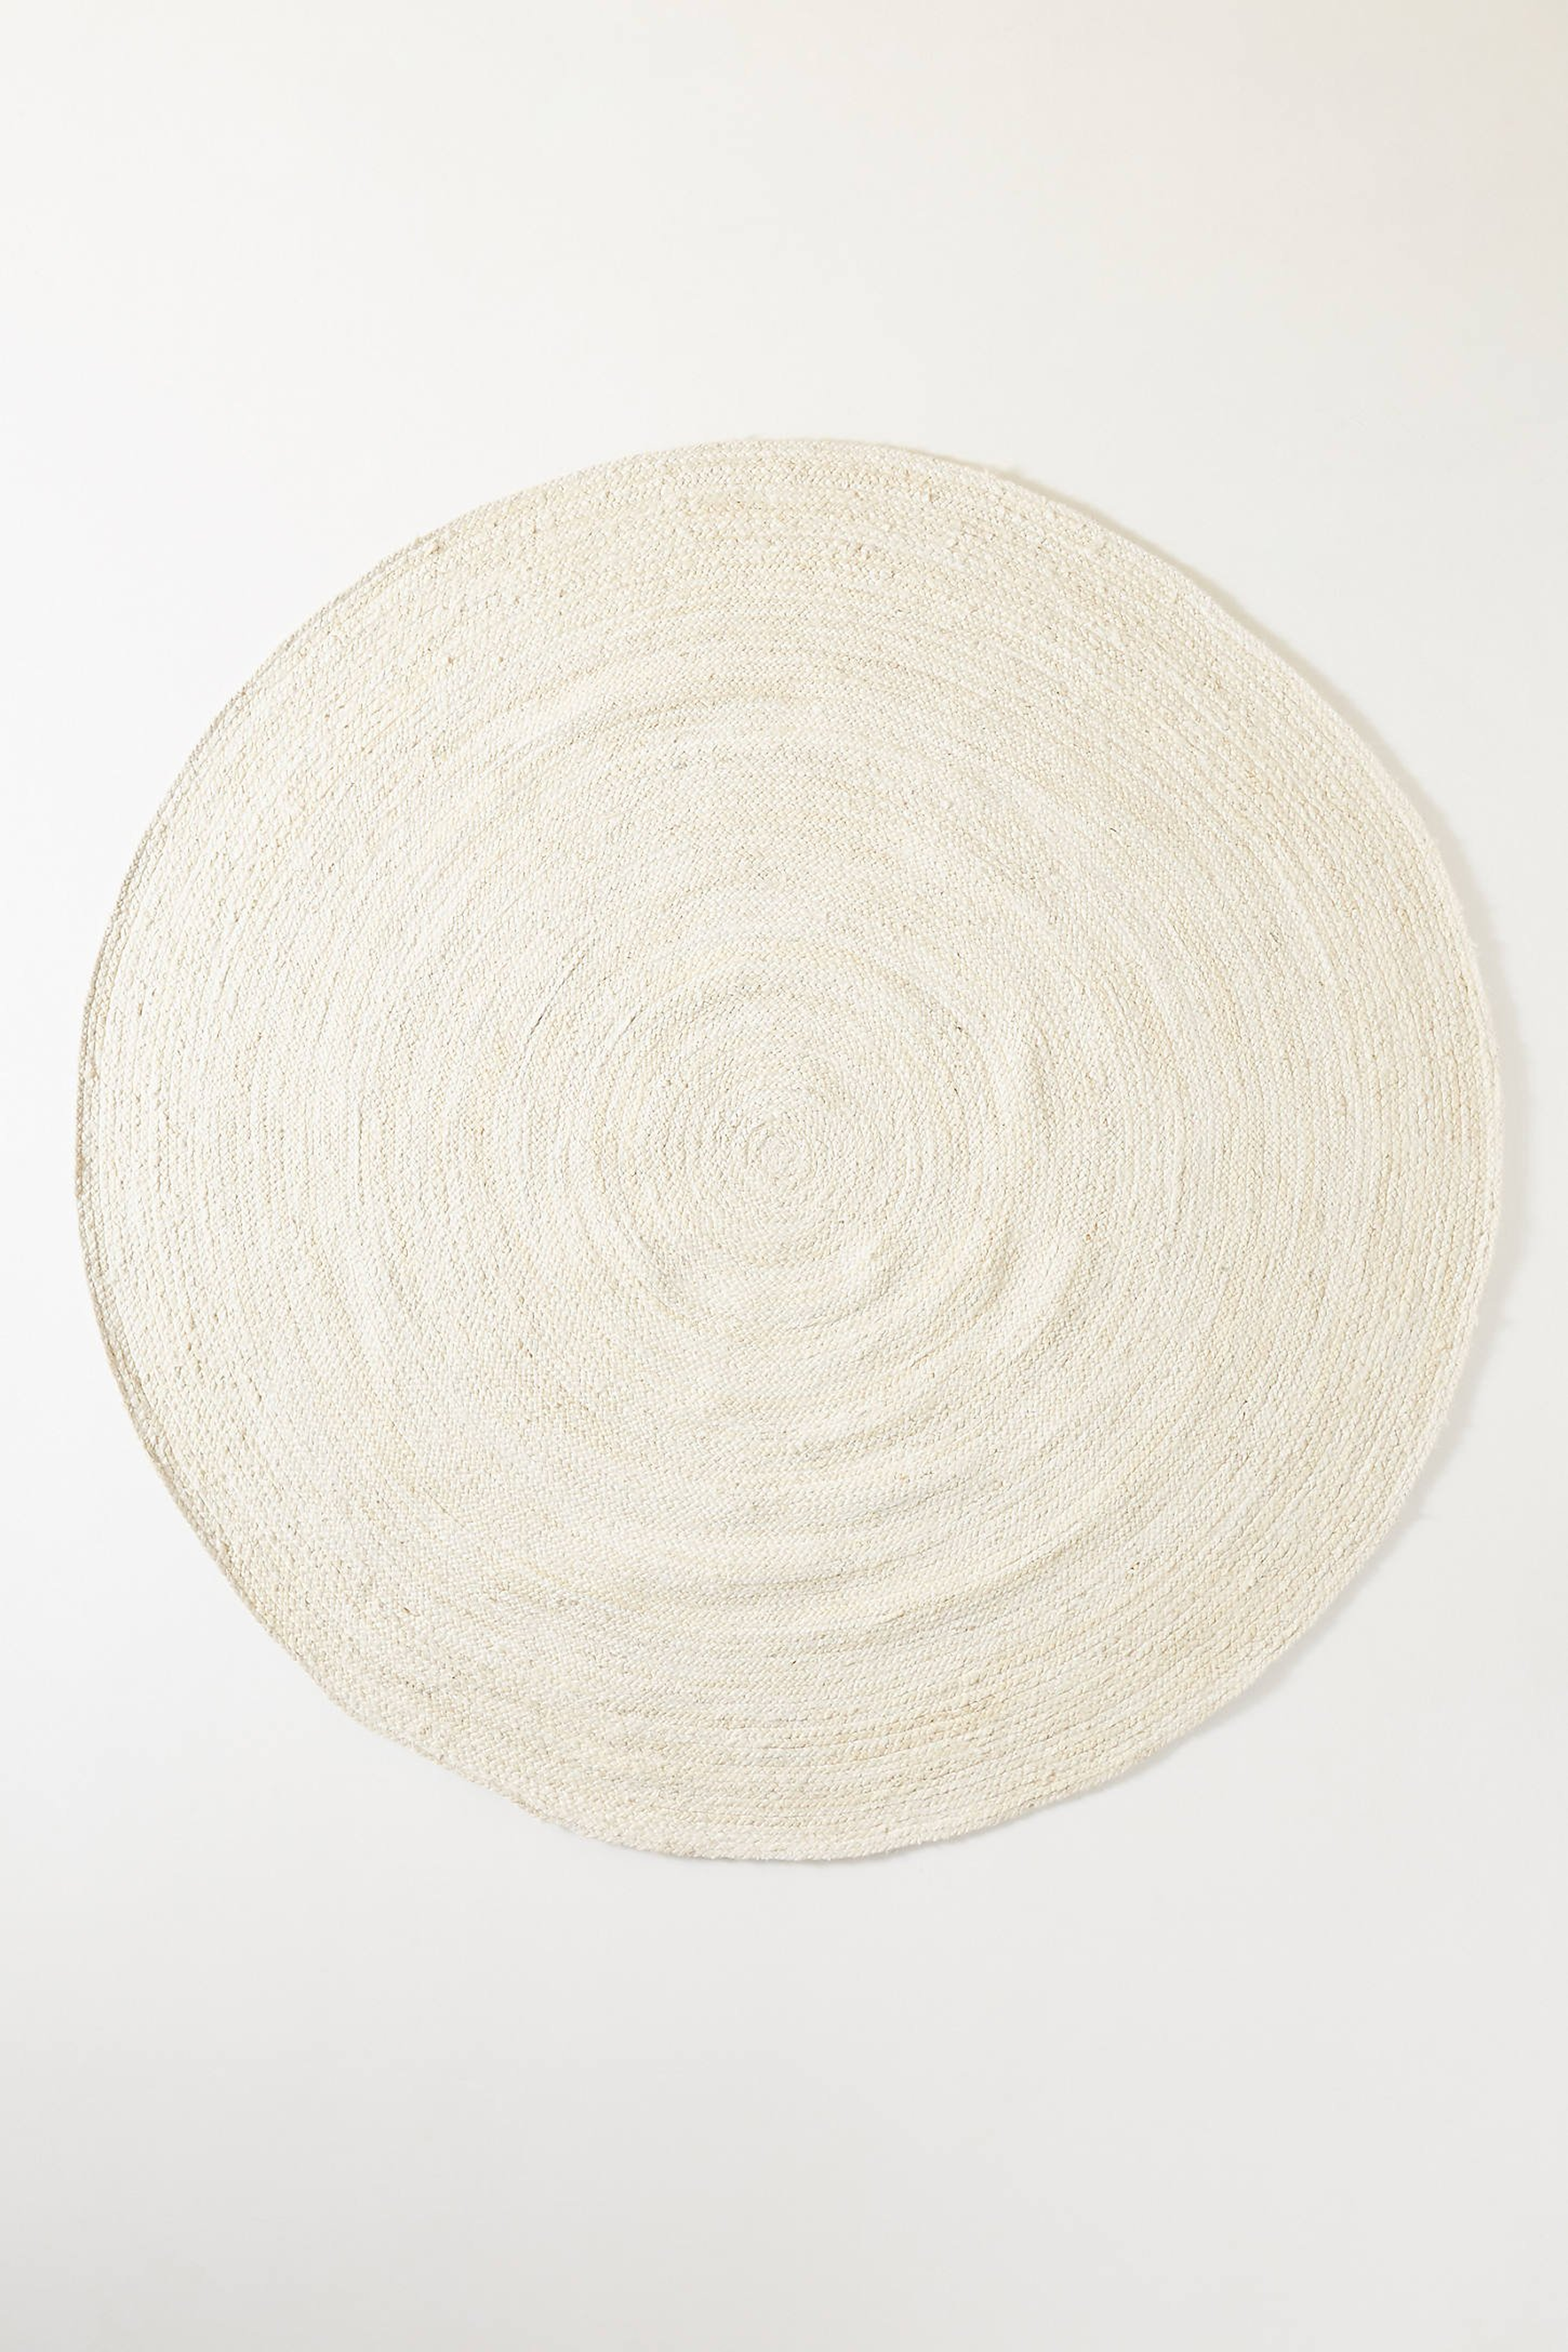 Handwoven Lorne Round Rug By Anthropologie in White Size 4 D - Anthropologie